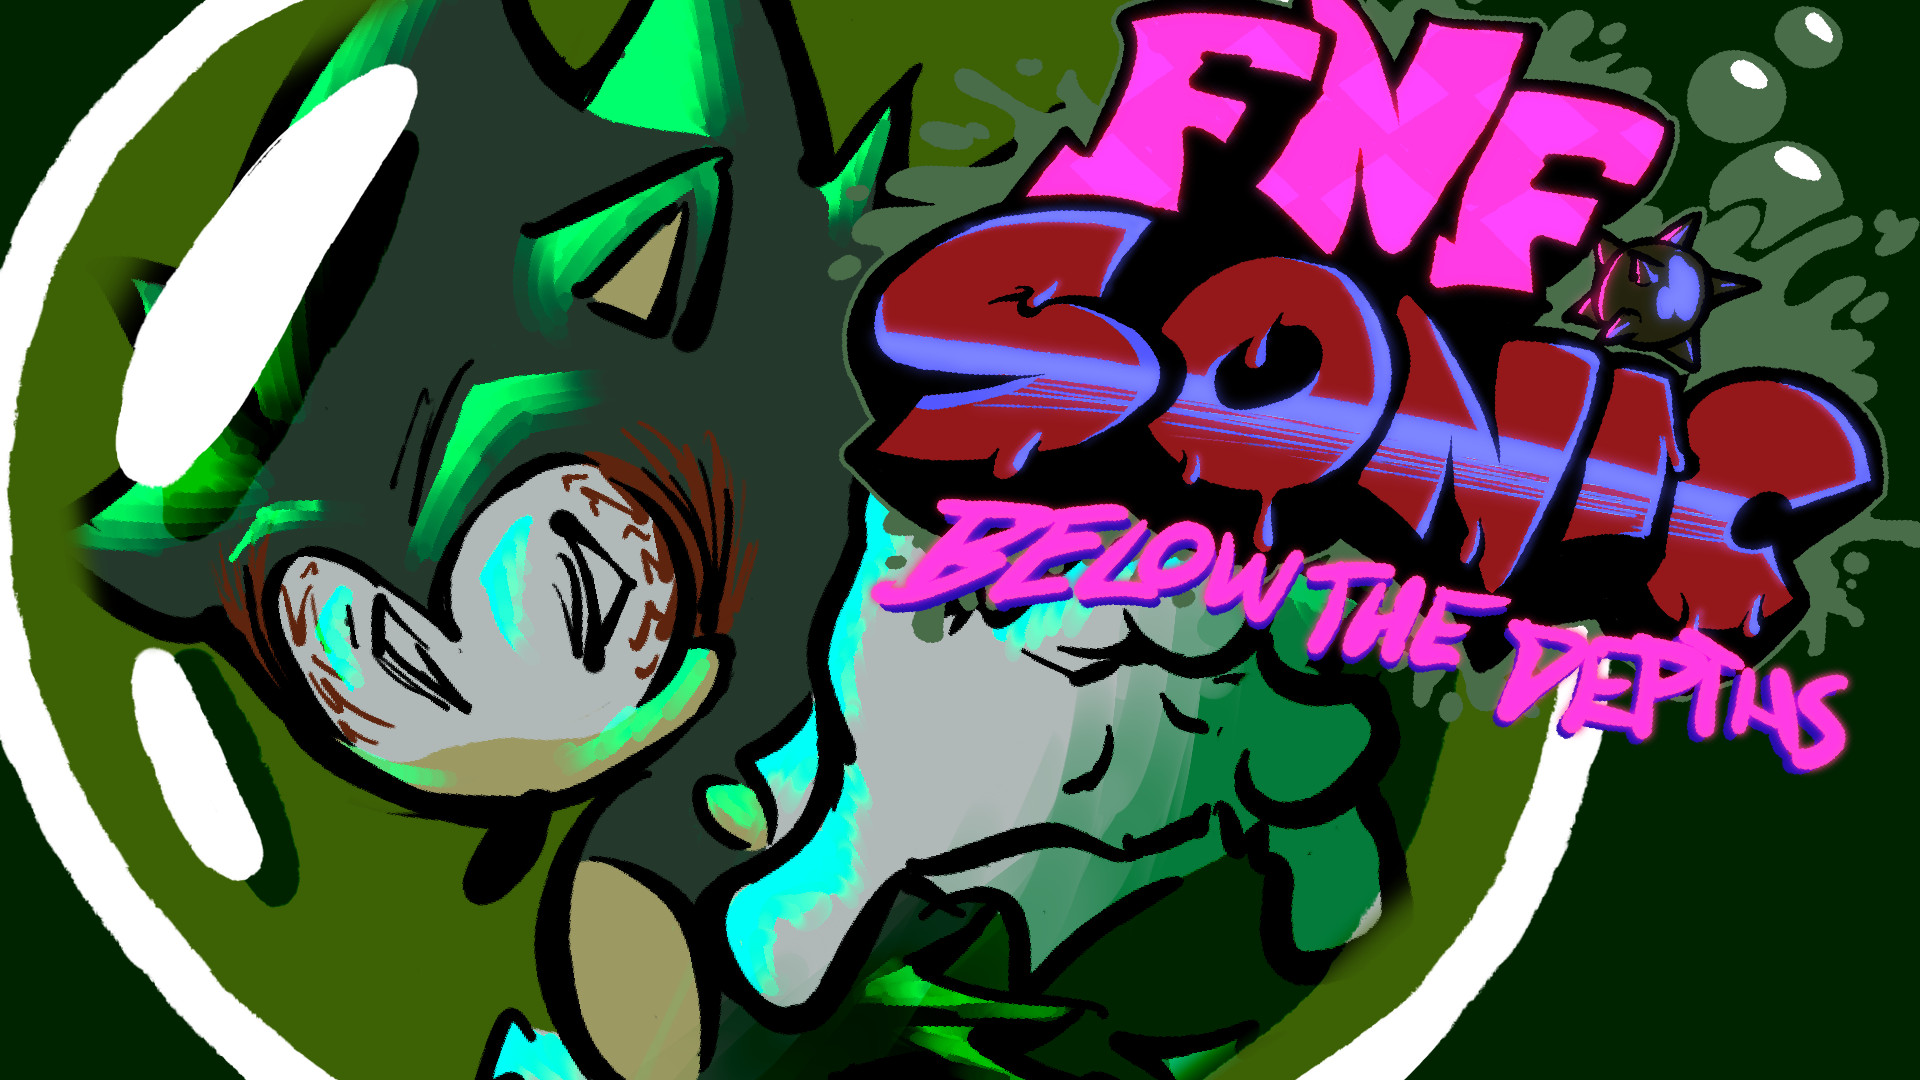 Friday Night Funkin' - VS Sonic PNG - FNF MODS [VERY HARD] 